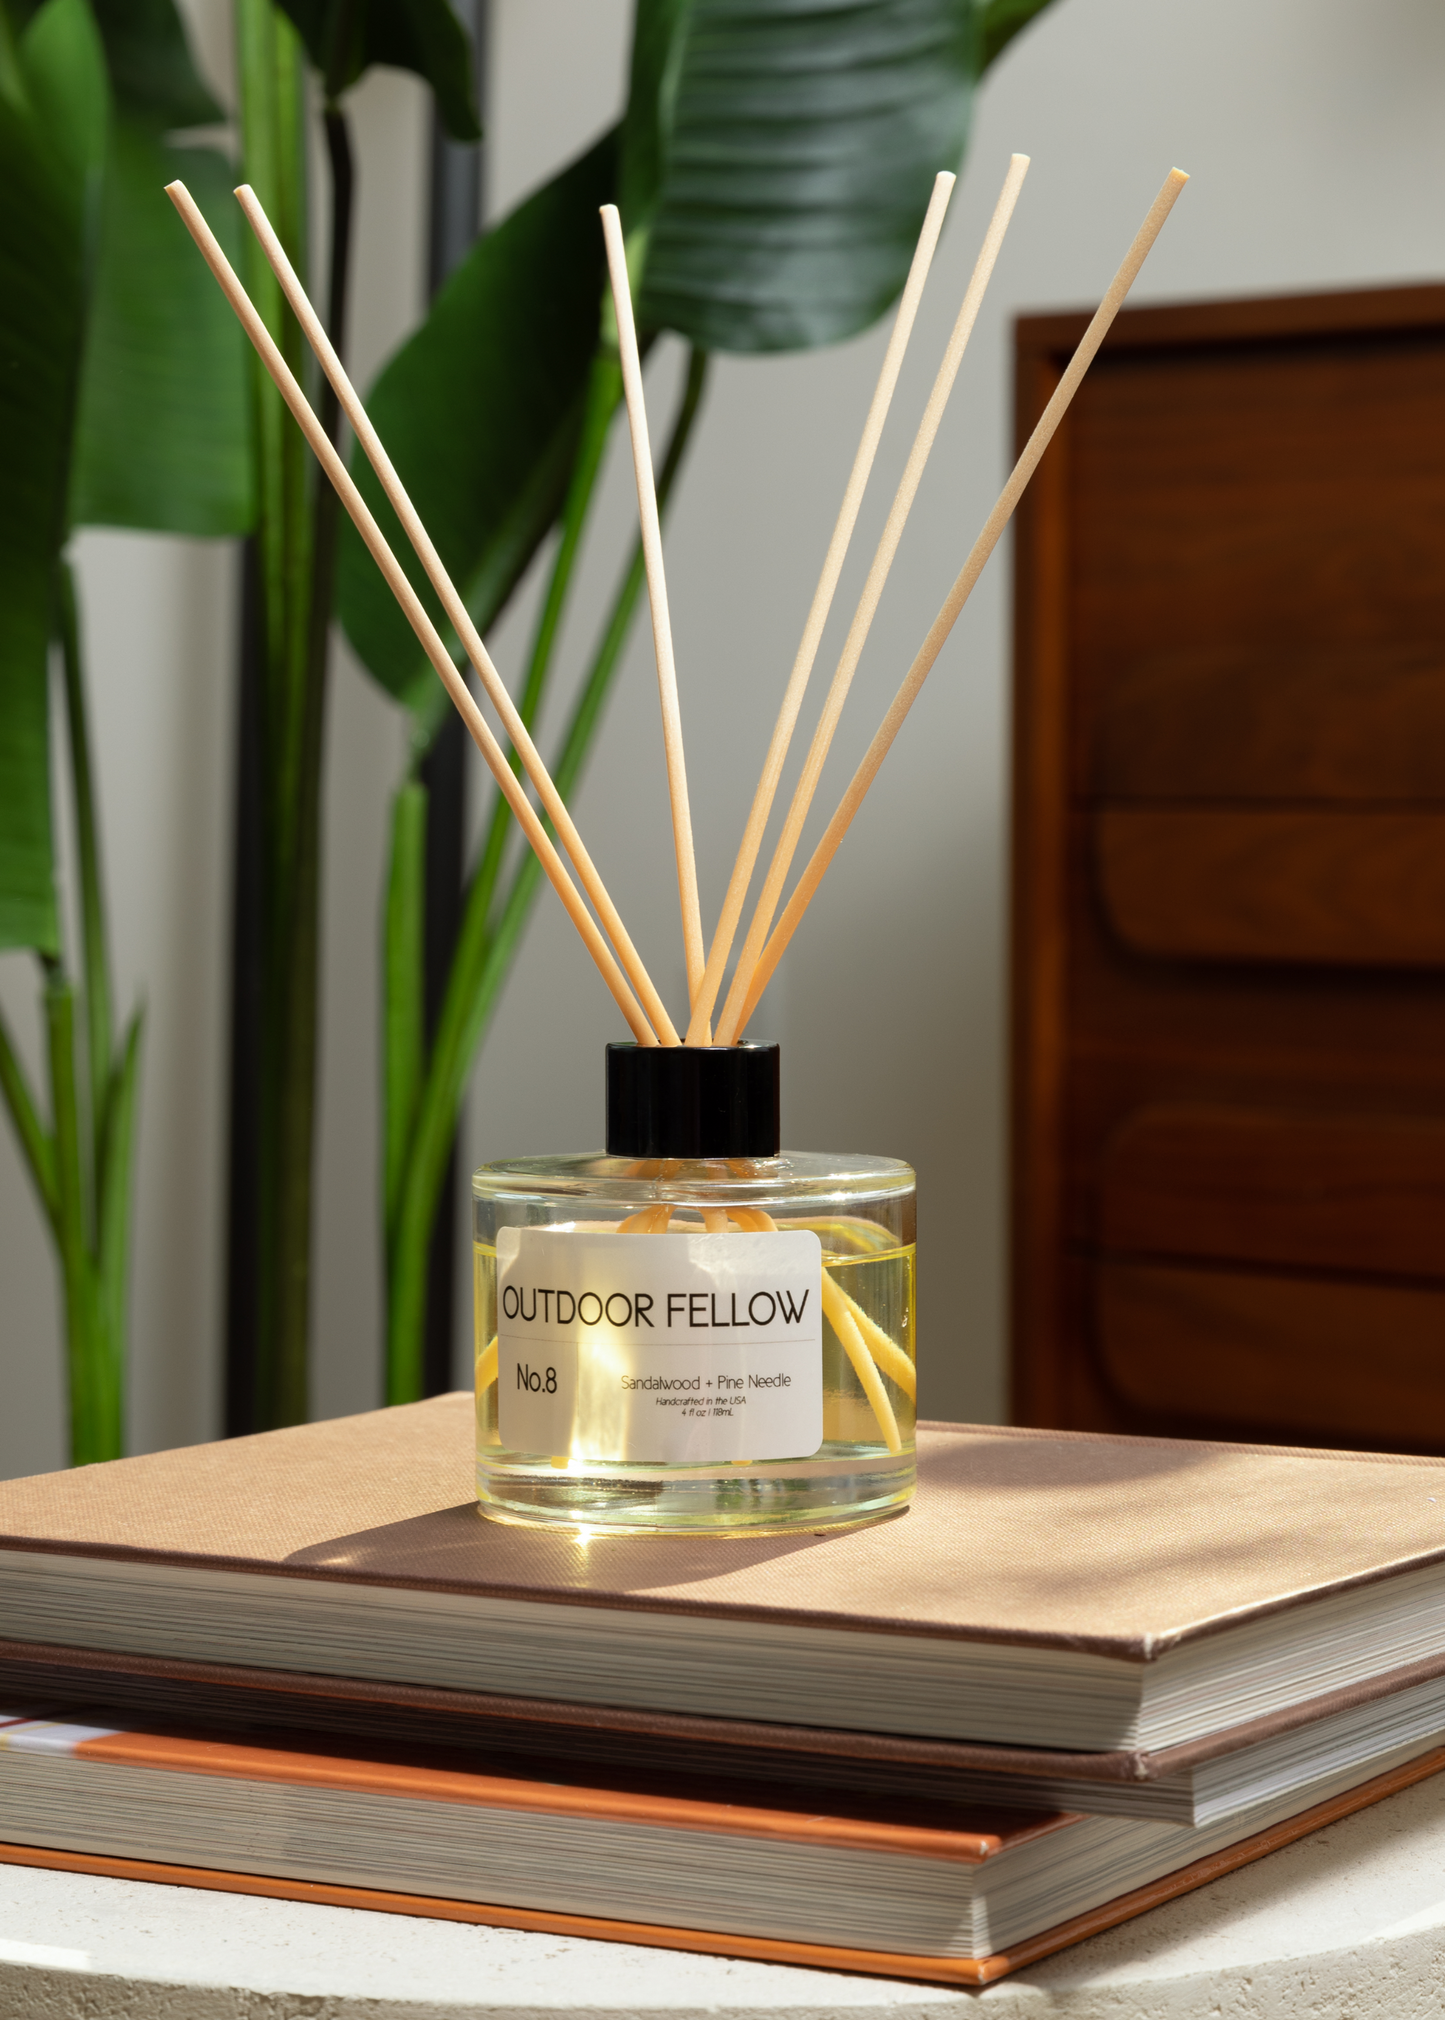 No.8 Sandalwood + Pine Needle reed diffuser on a stack of books in a living room